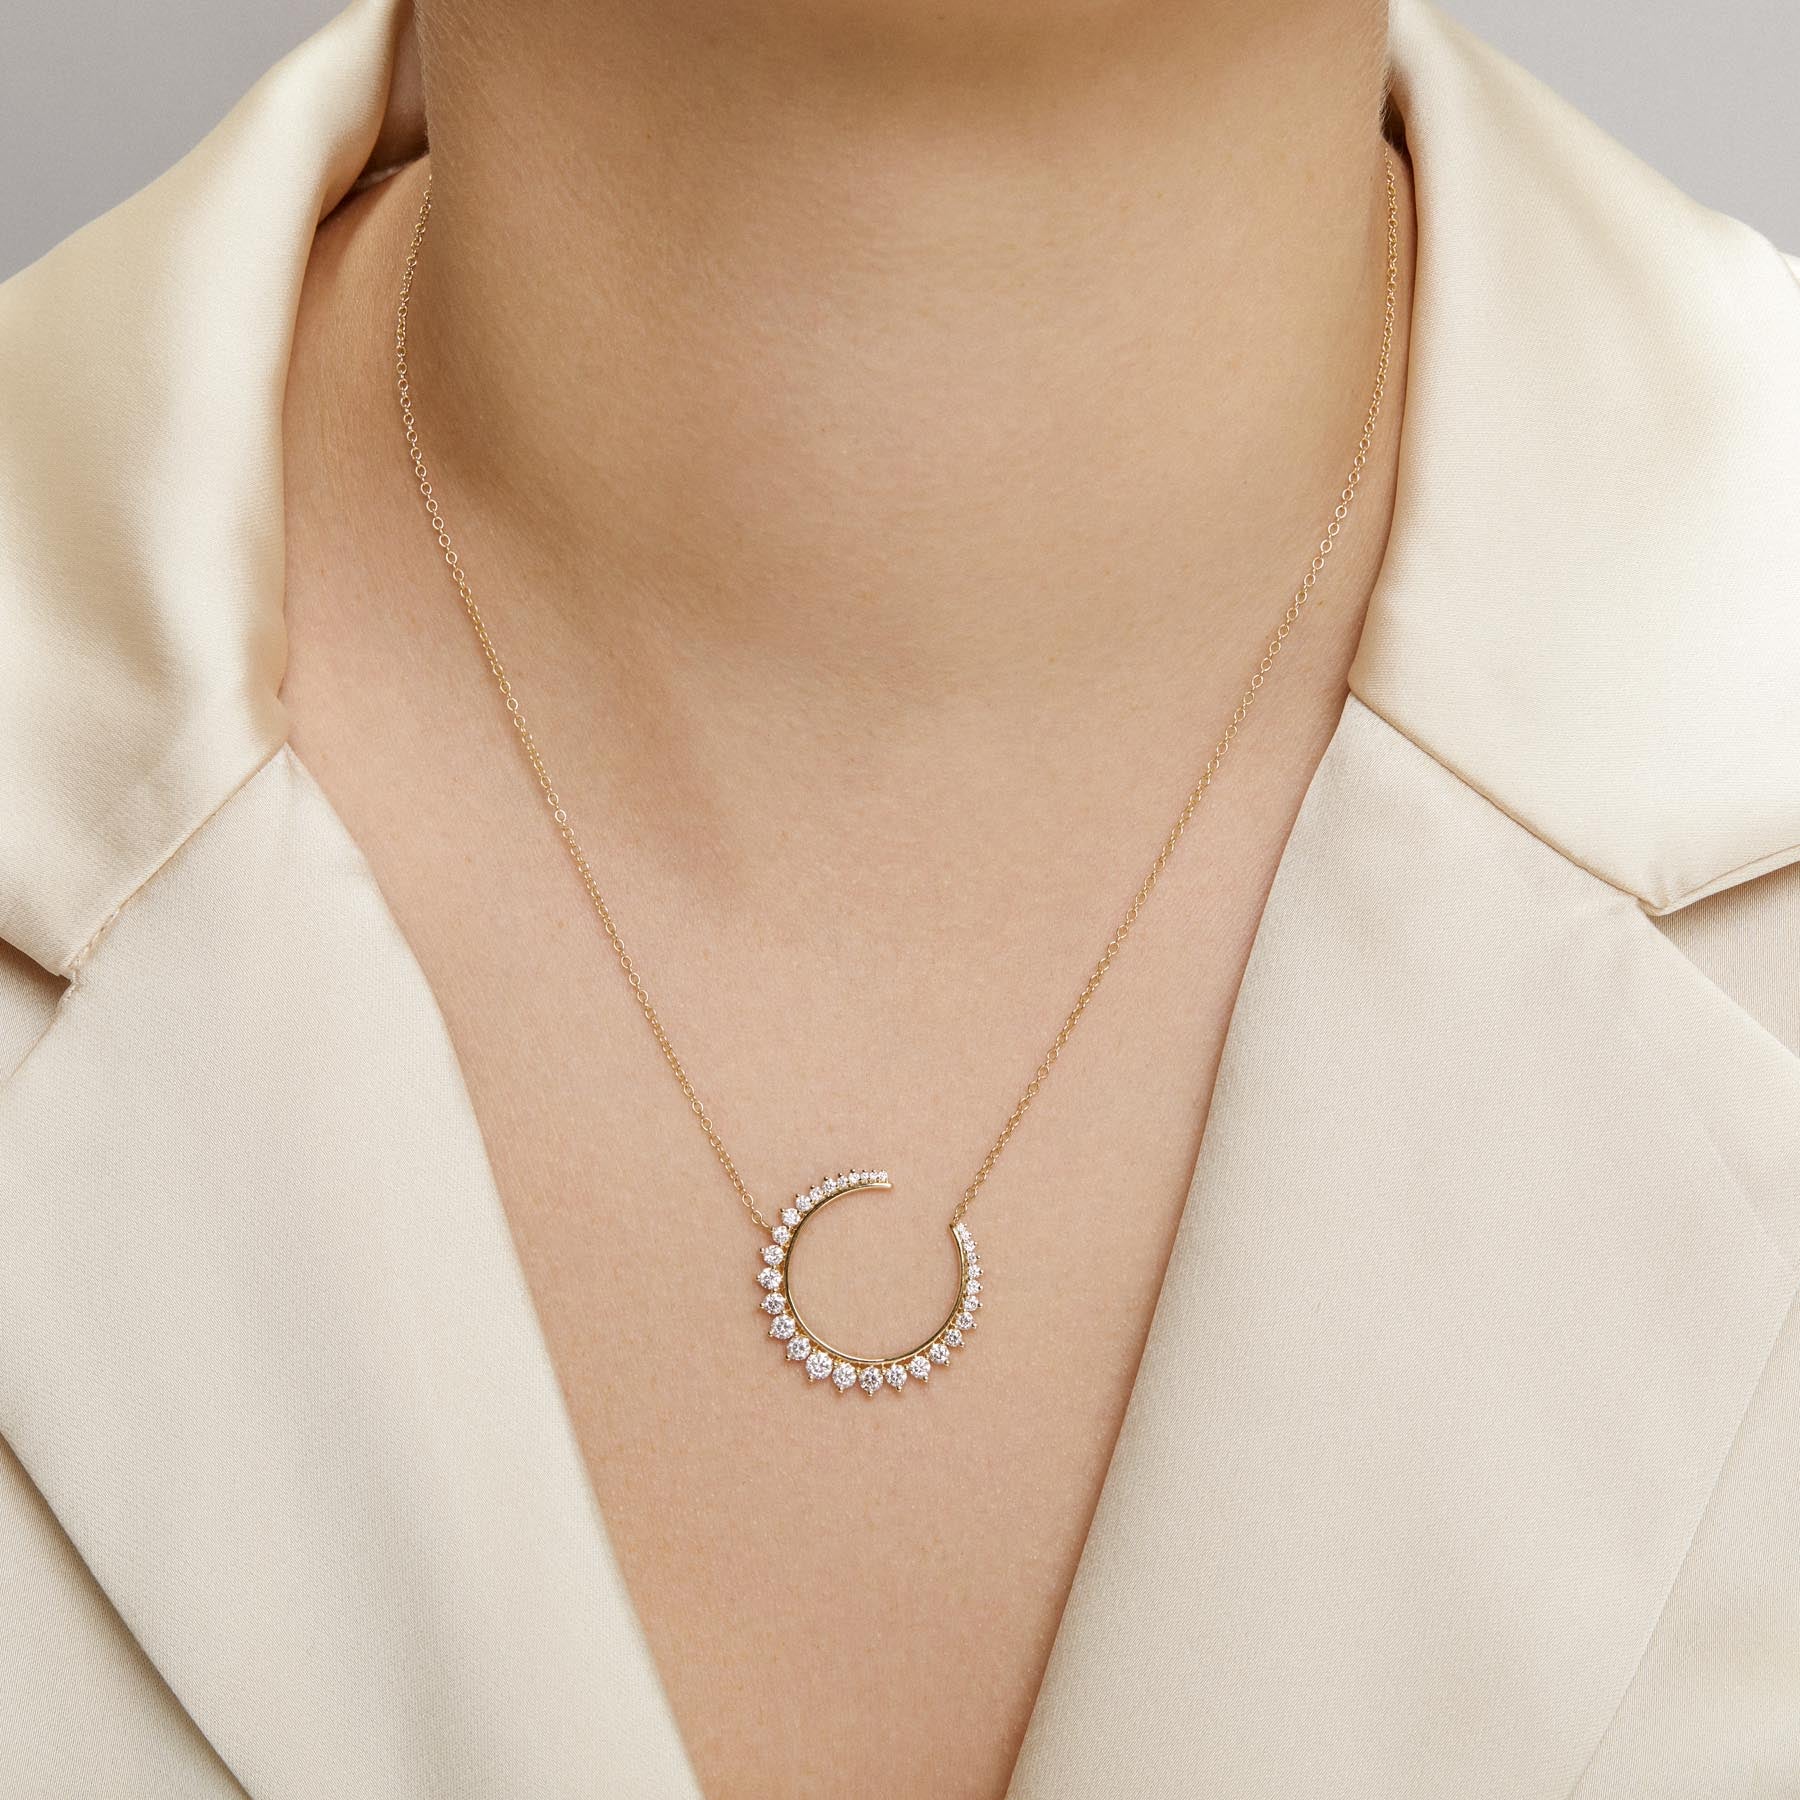 14KT Yellow Gold Diamond Lune Necklace